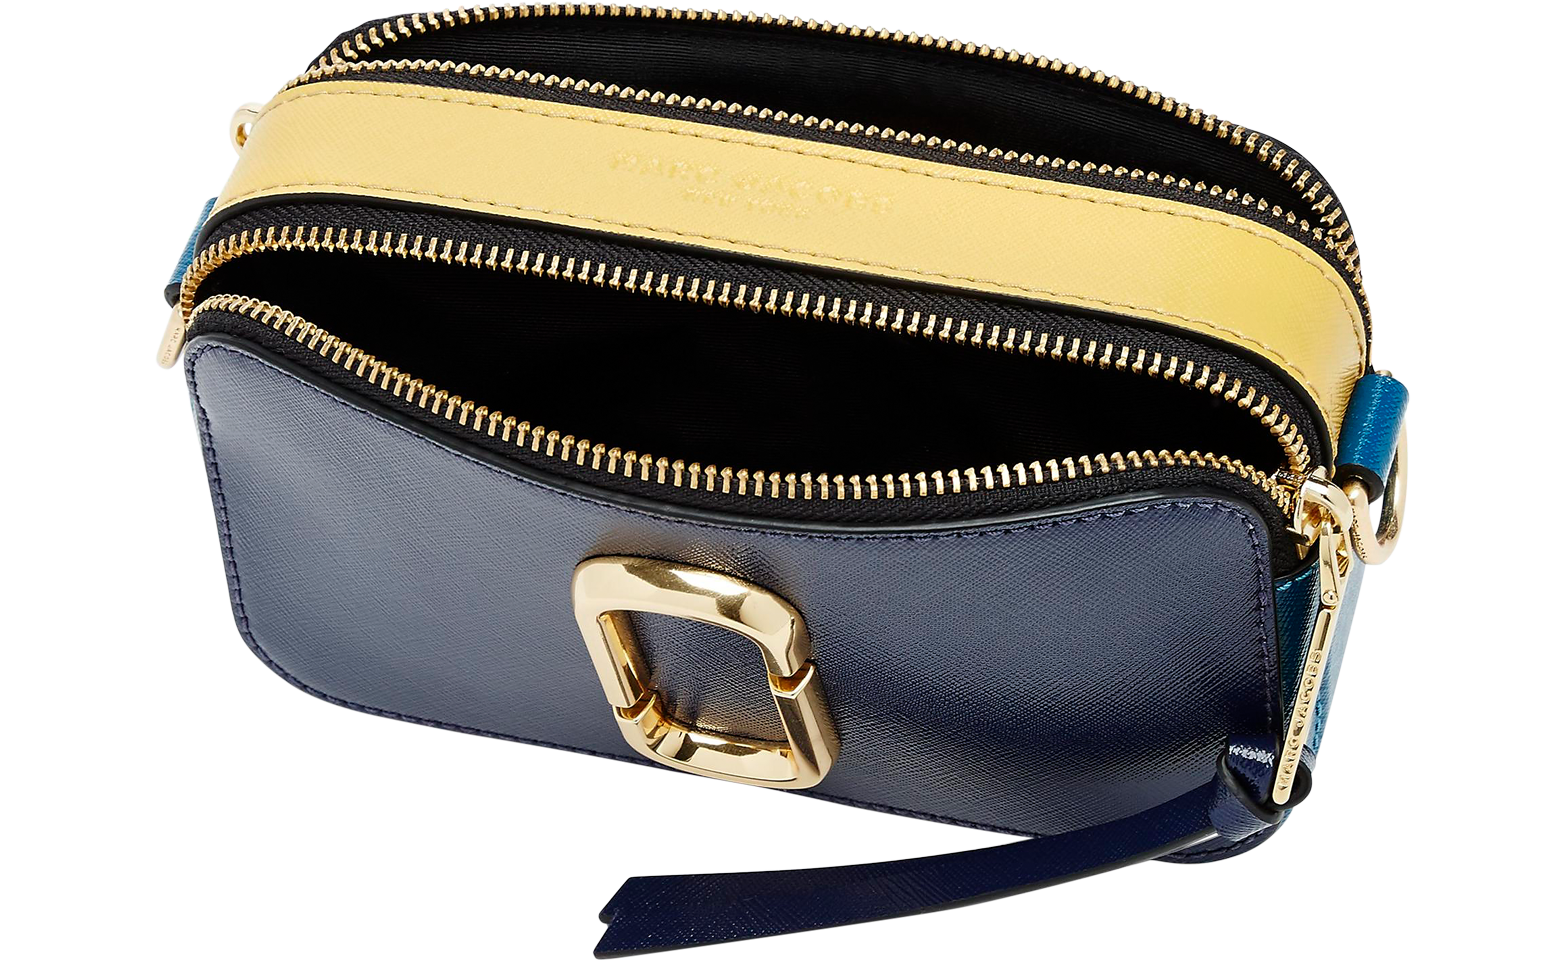 Marc Jacobs The Logo Strap Snapshot Bag at FORZIERI